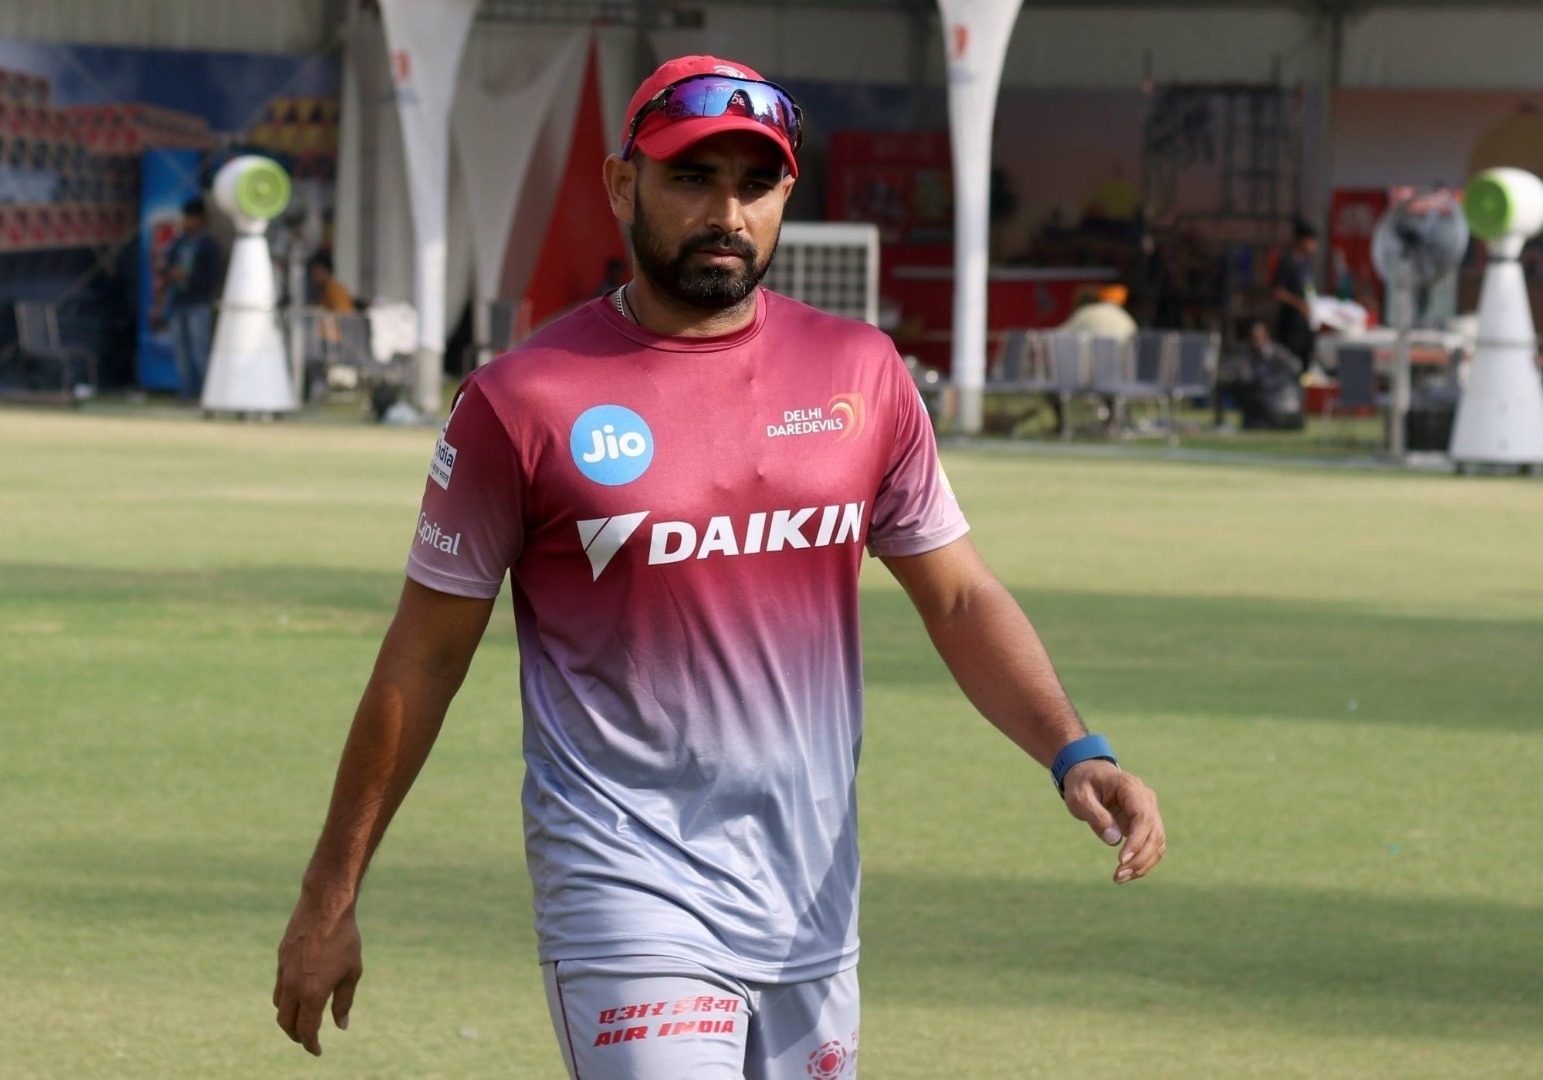 Battered and bruised but not broken, Shami joins Daredevils training  Battered and bruised but not broken, Shami joins Daredevils training